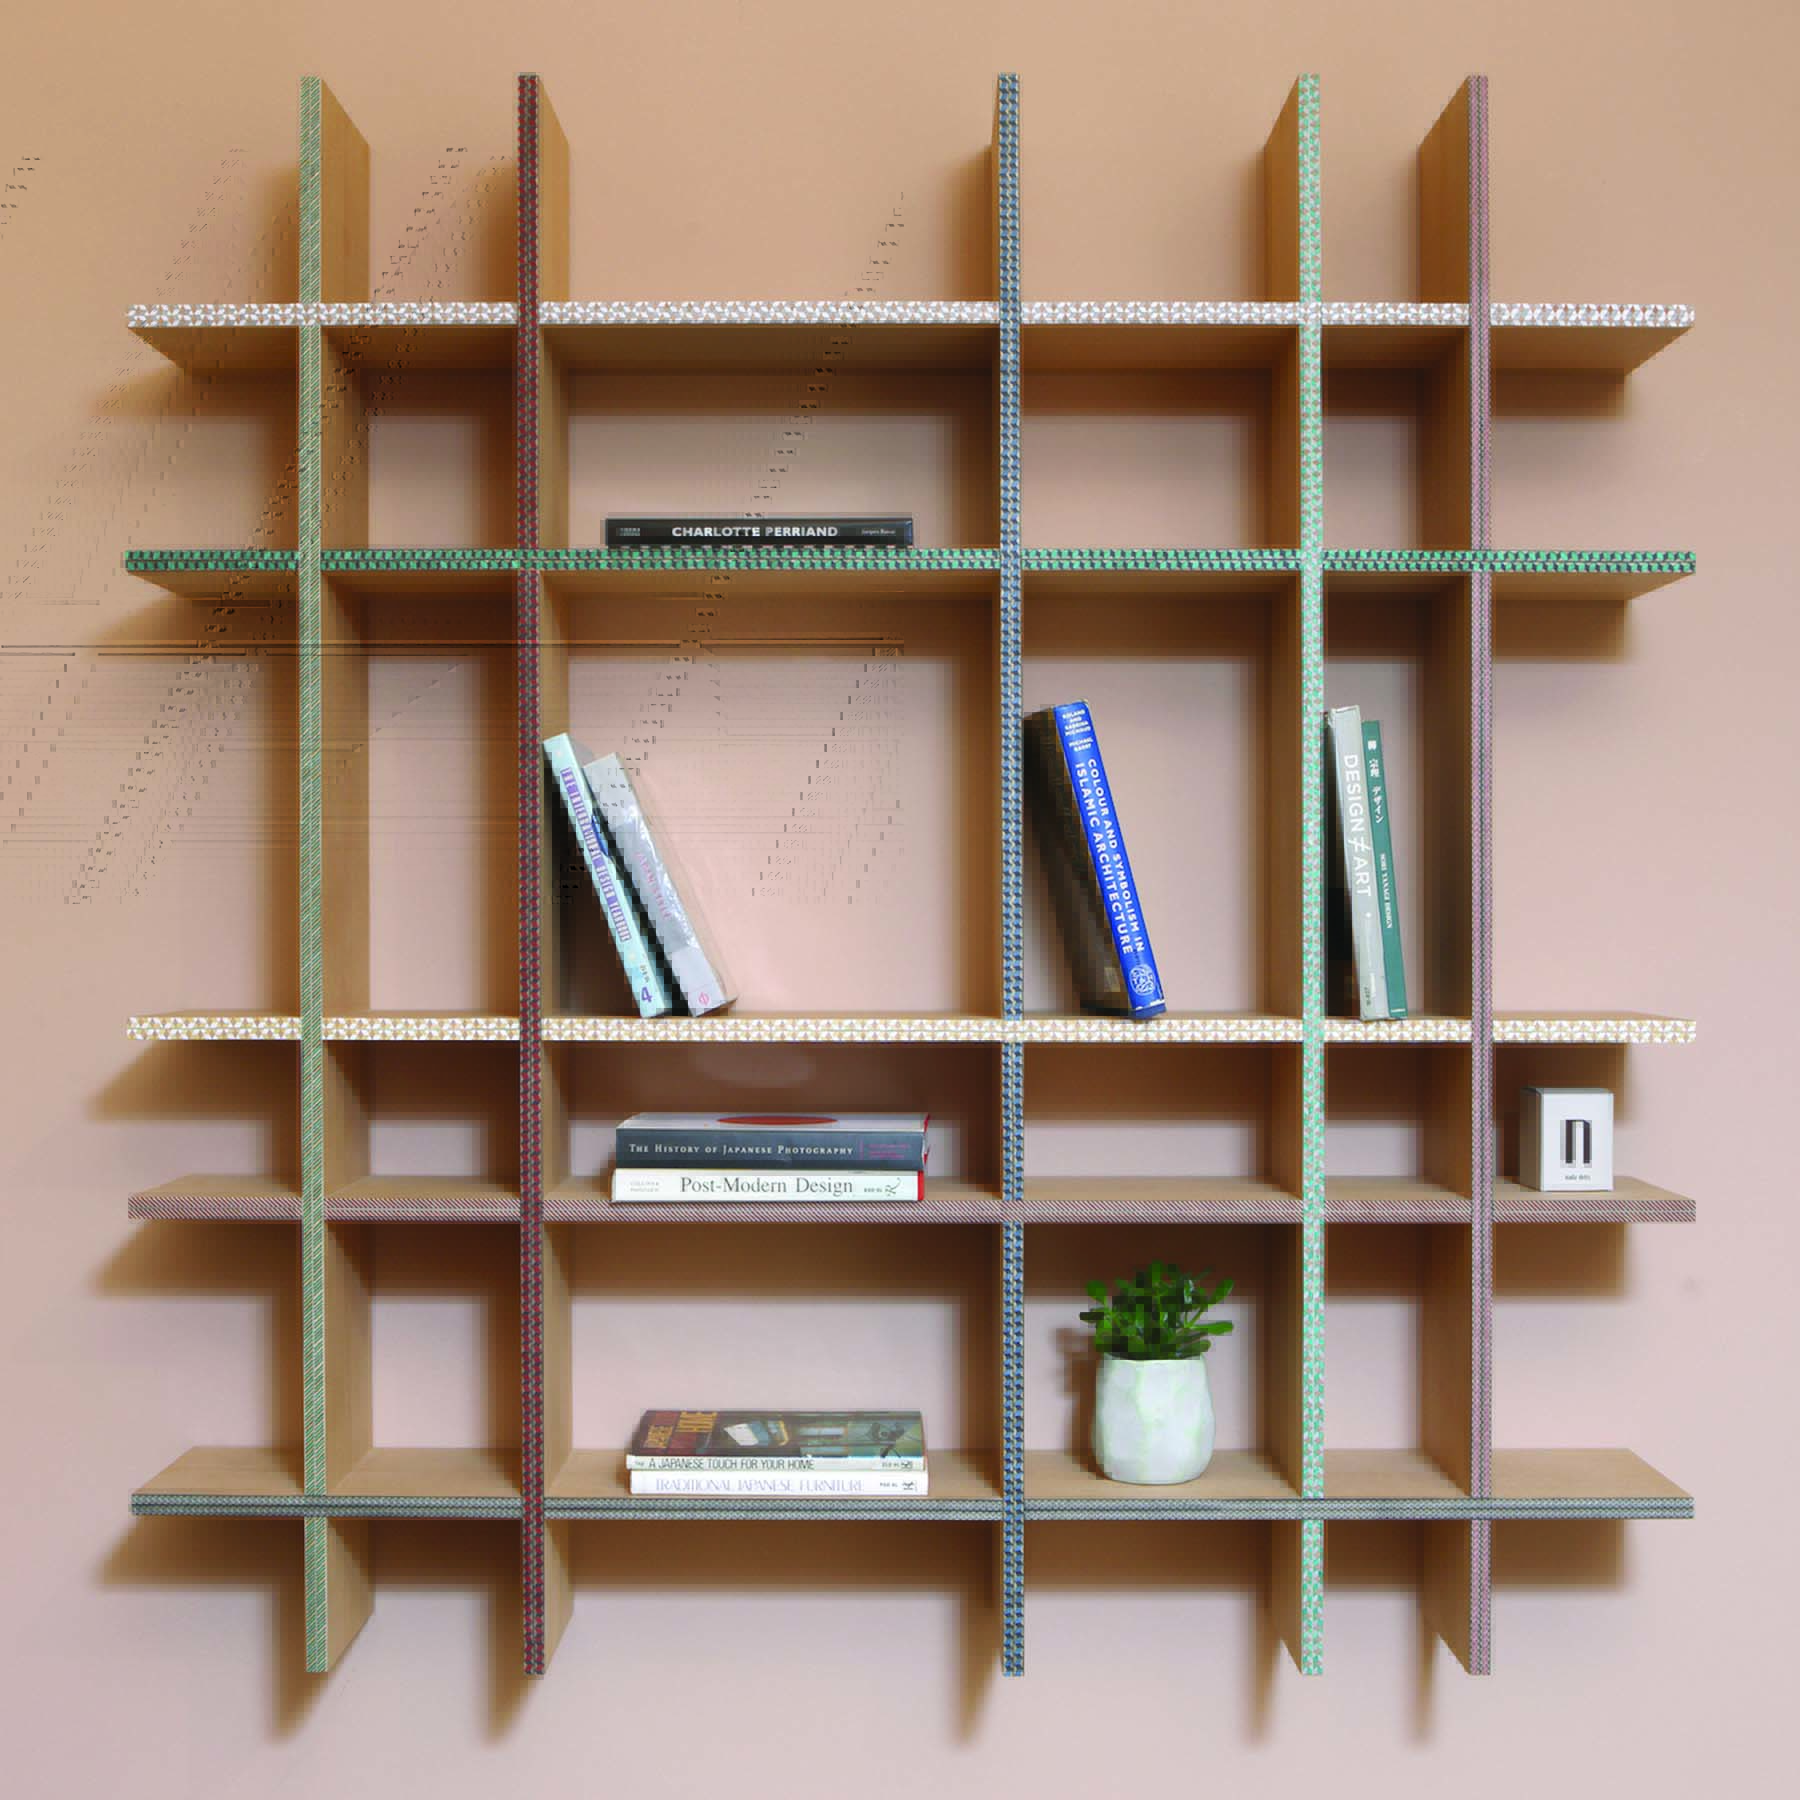 Funquetry Shelving Unit Nada Debs The, Modular Bookcase System Ukraine